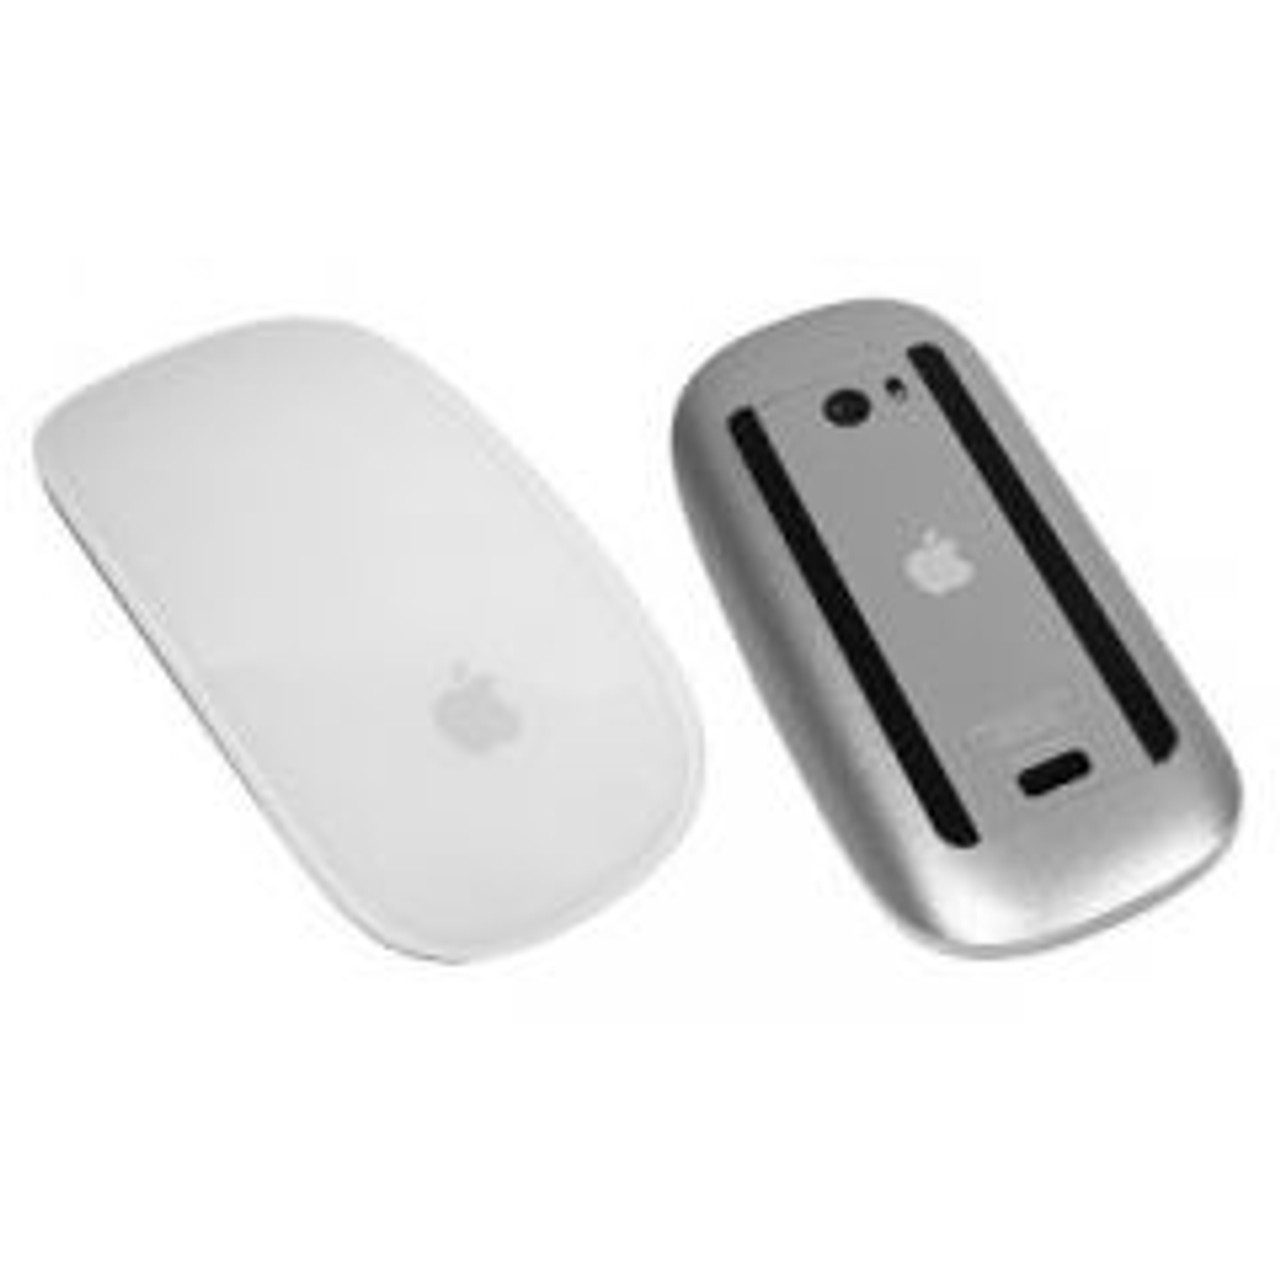 661-5688 | Apple | Wireless Magic Mouse For Imac